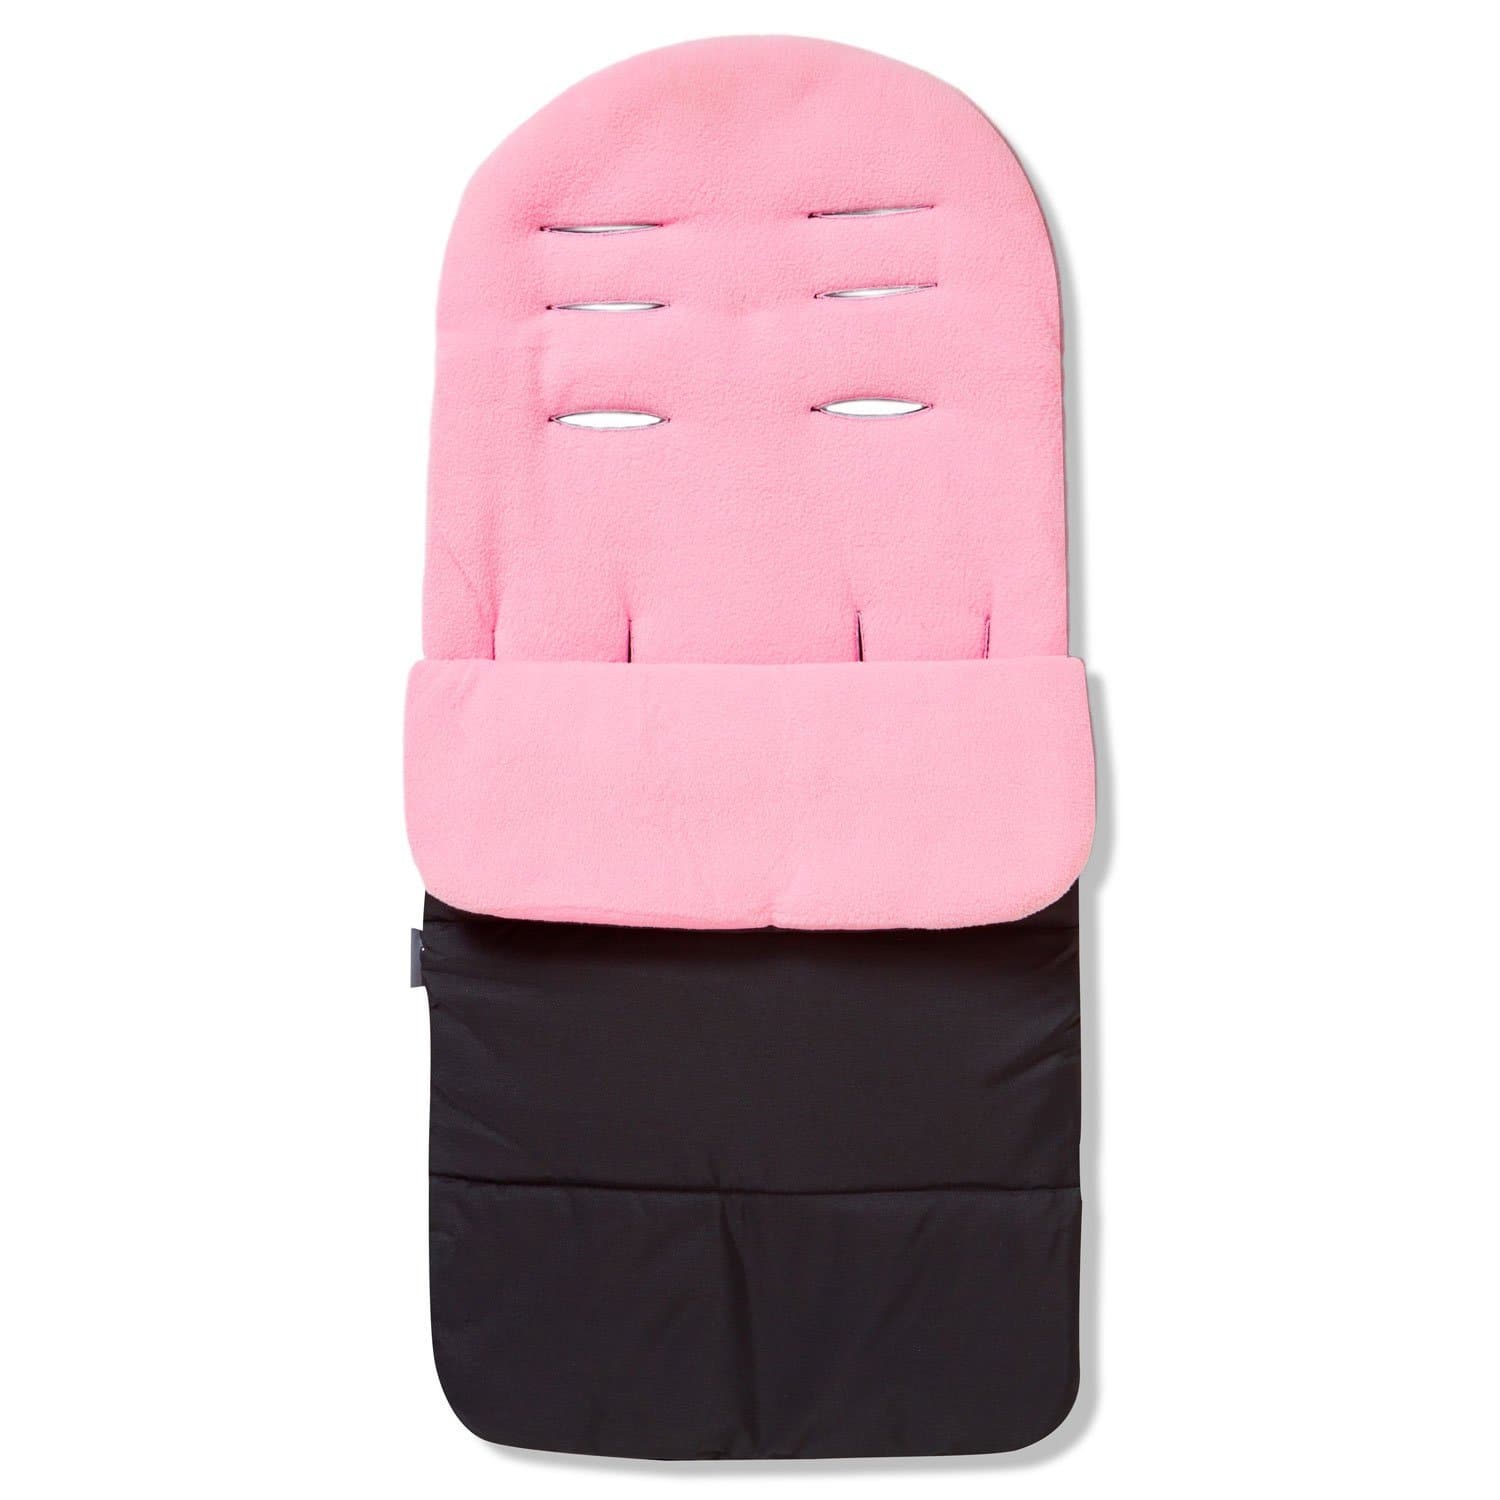 Premium Footmuff / Cosy Toes Compatible with Orbit Baby - Candy Pink / Fits All Models | For Your Little One